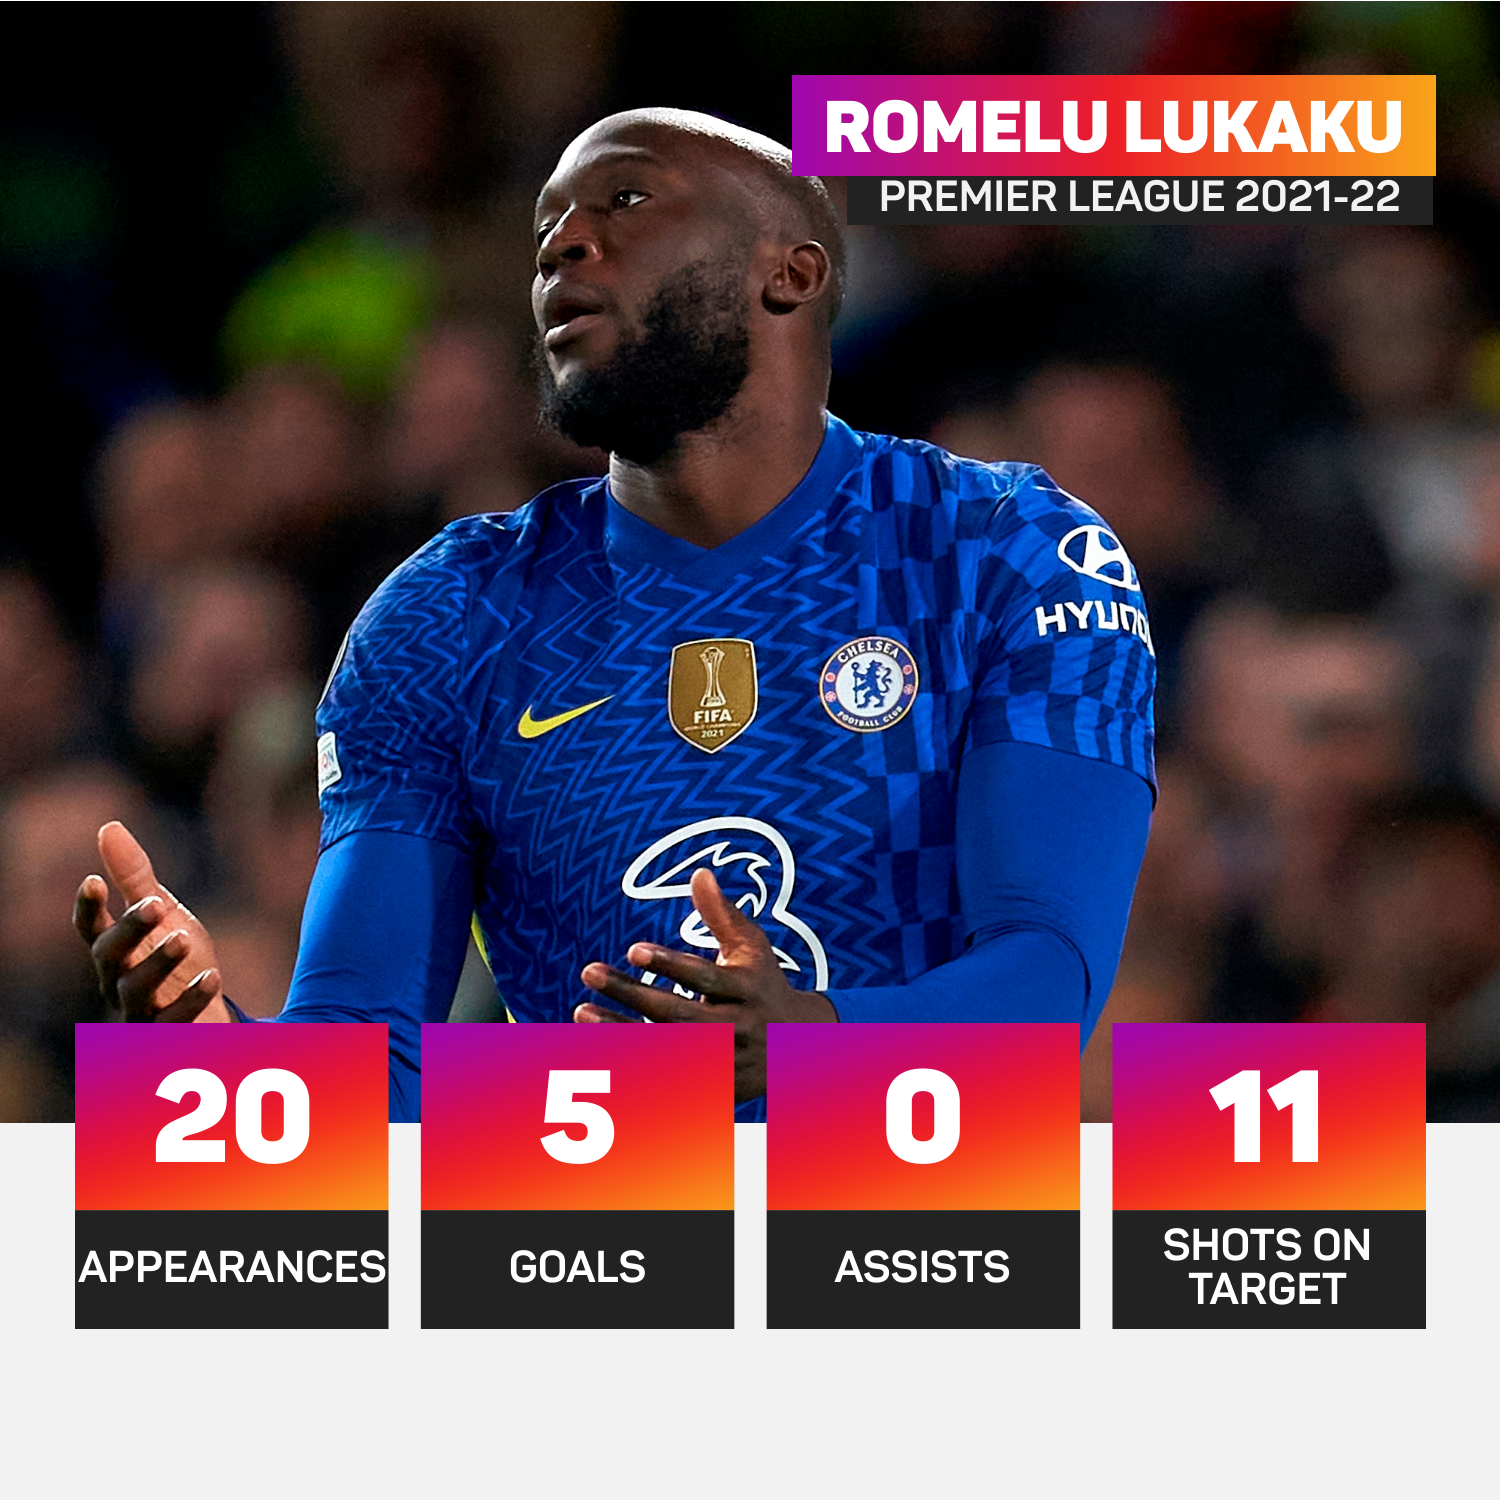 Romelu Lukaku has not been able to get into his stride